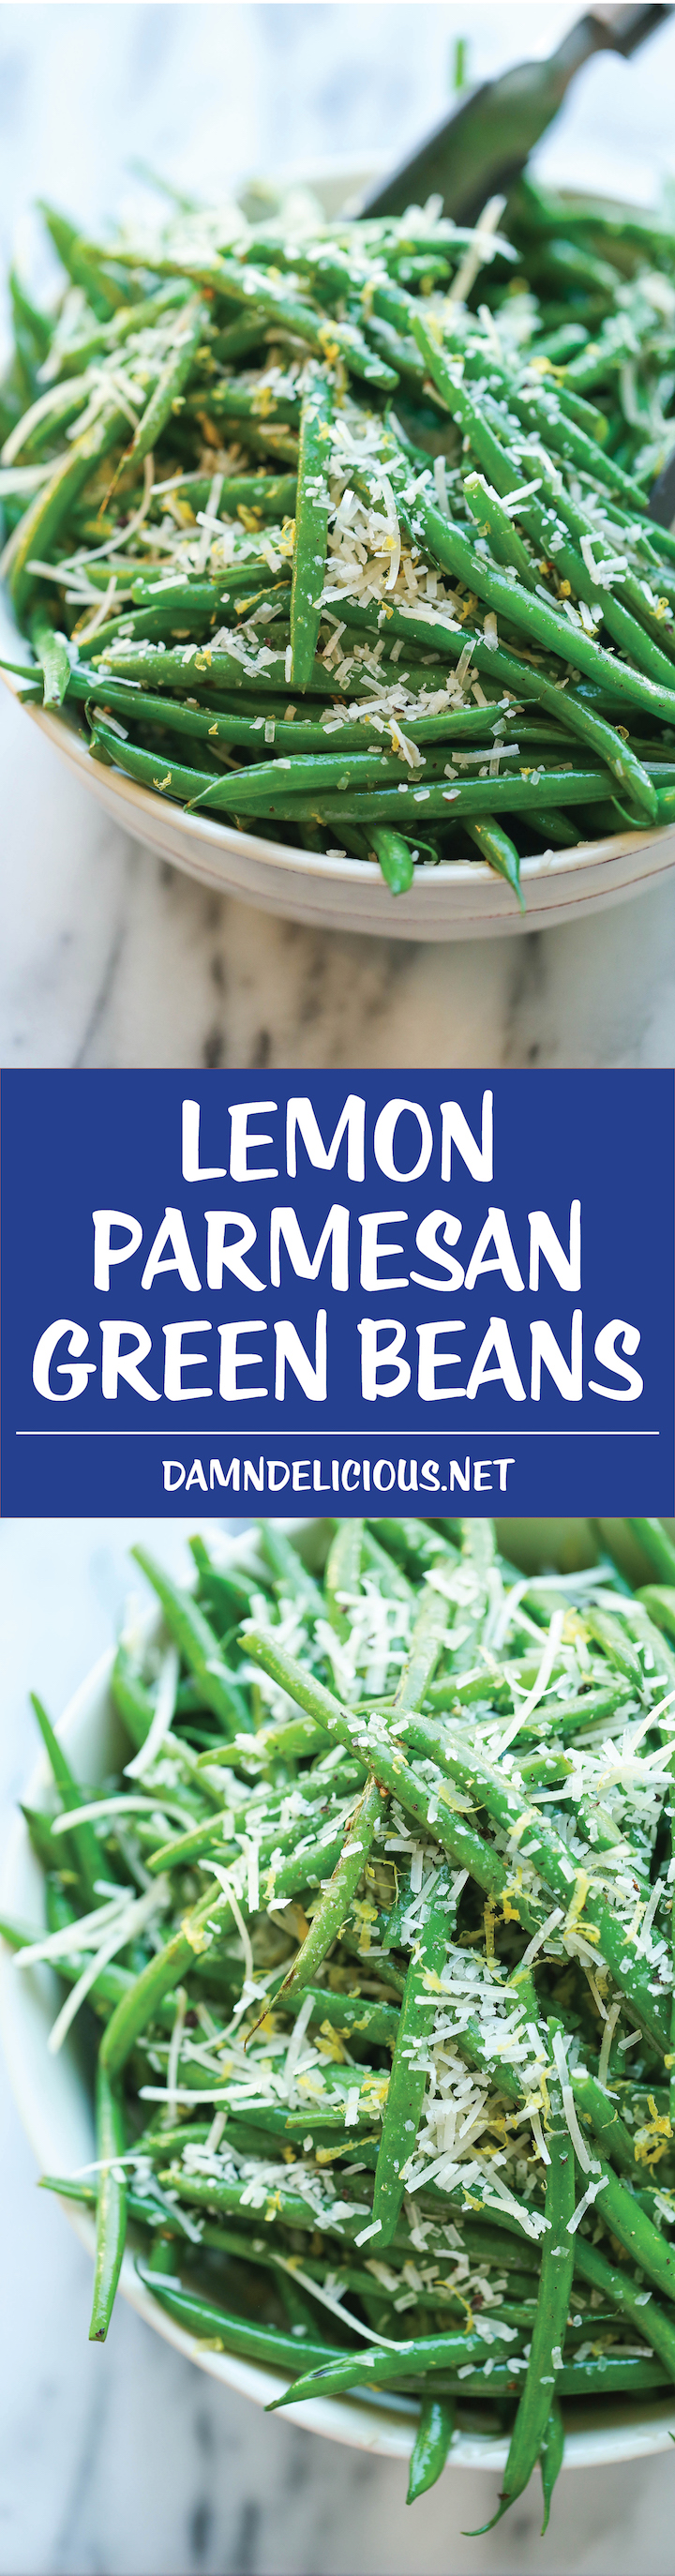 Lemon Parmesan Green Beans - Super simple skillet green beans. Perfectly crisp-tender, smothered in lemon zest and Parmesan cheese. Easy and flavorful!